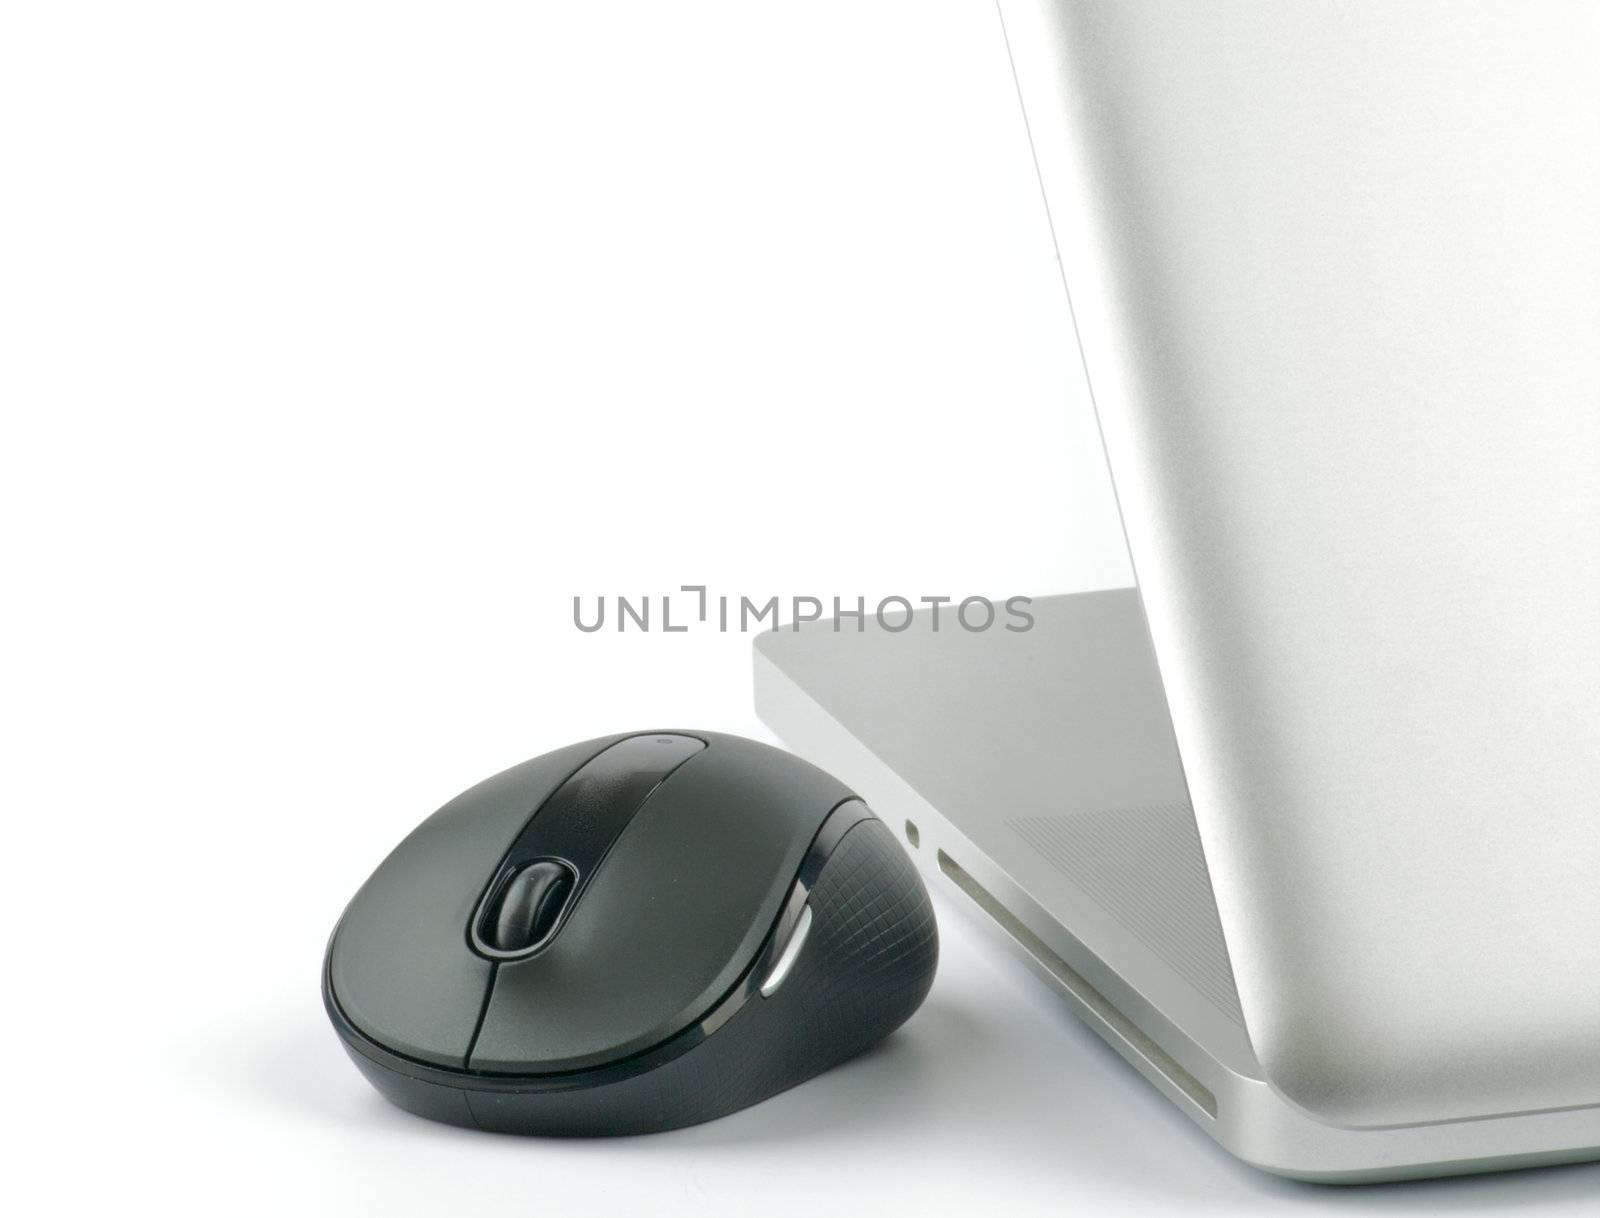 Steel laptop and black computer mouse isolated on white background